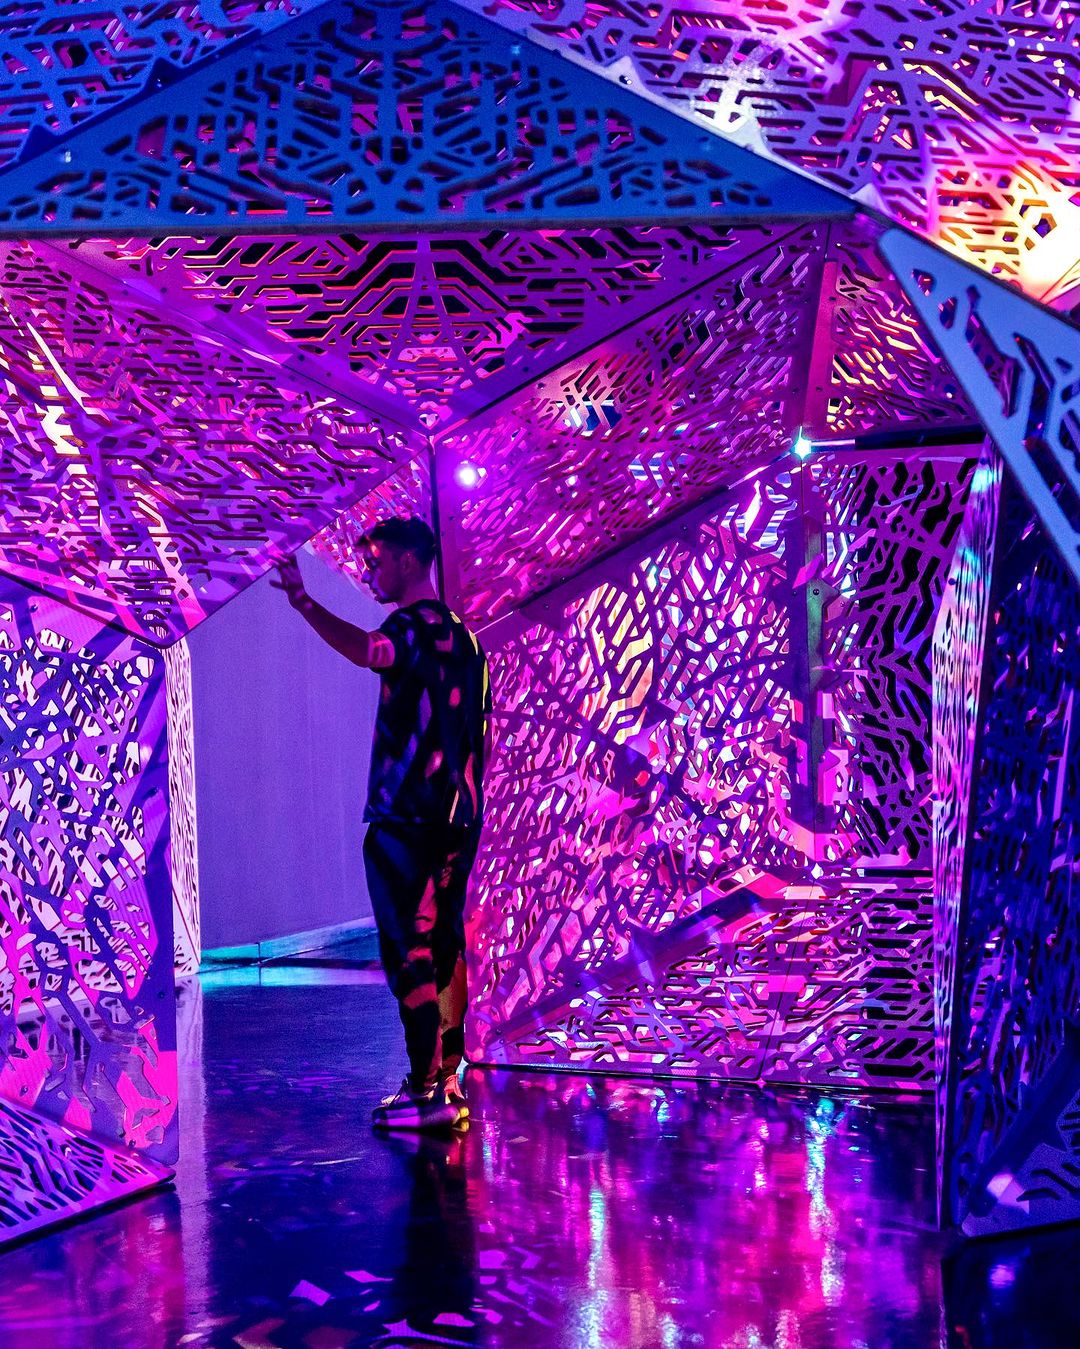 MAN STANDS IN DOORWAY OF PINK AND PURPLE IMMERSIVE ART INSTALLATION AT OTHERWORLD COLUMBUS